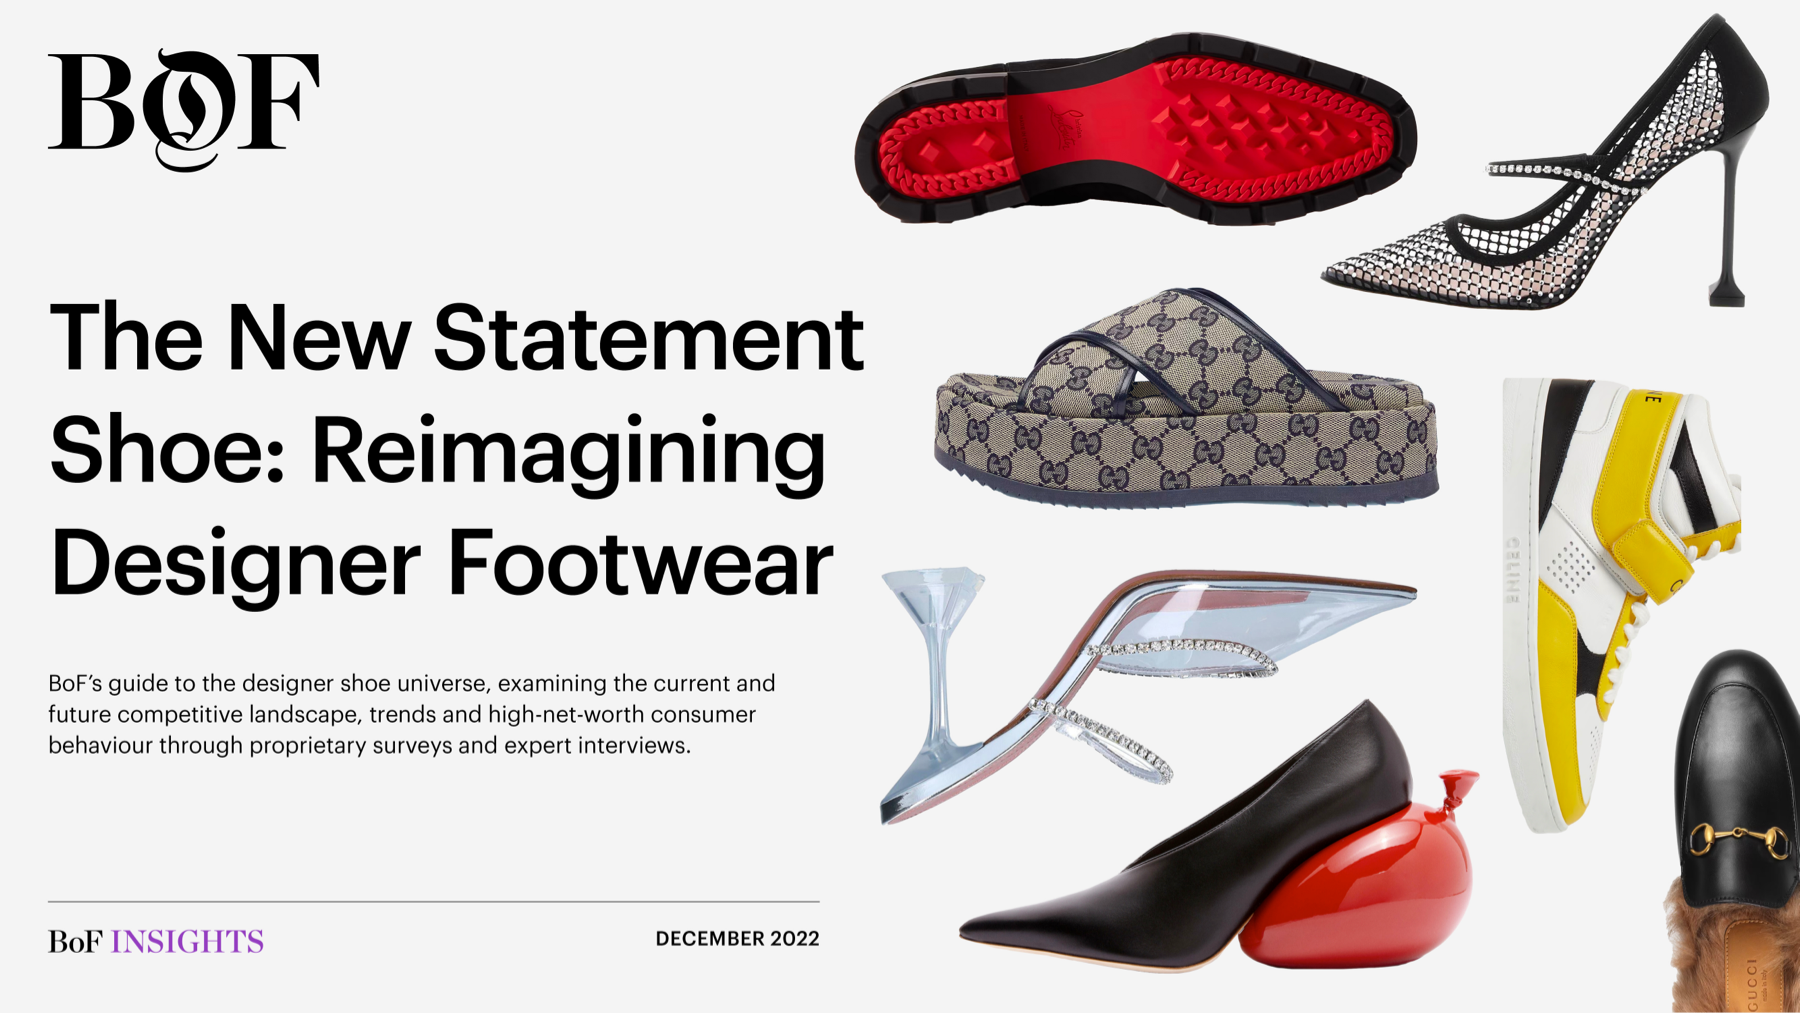 Reflection - The fashion houses' impact on the quality shoe